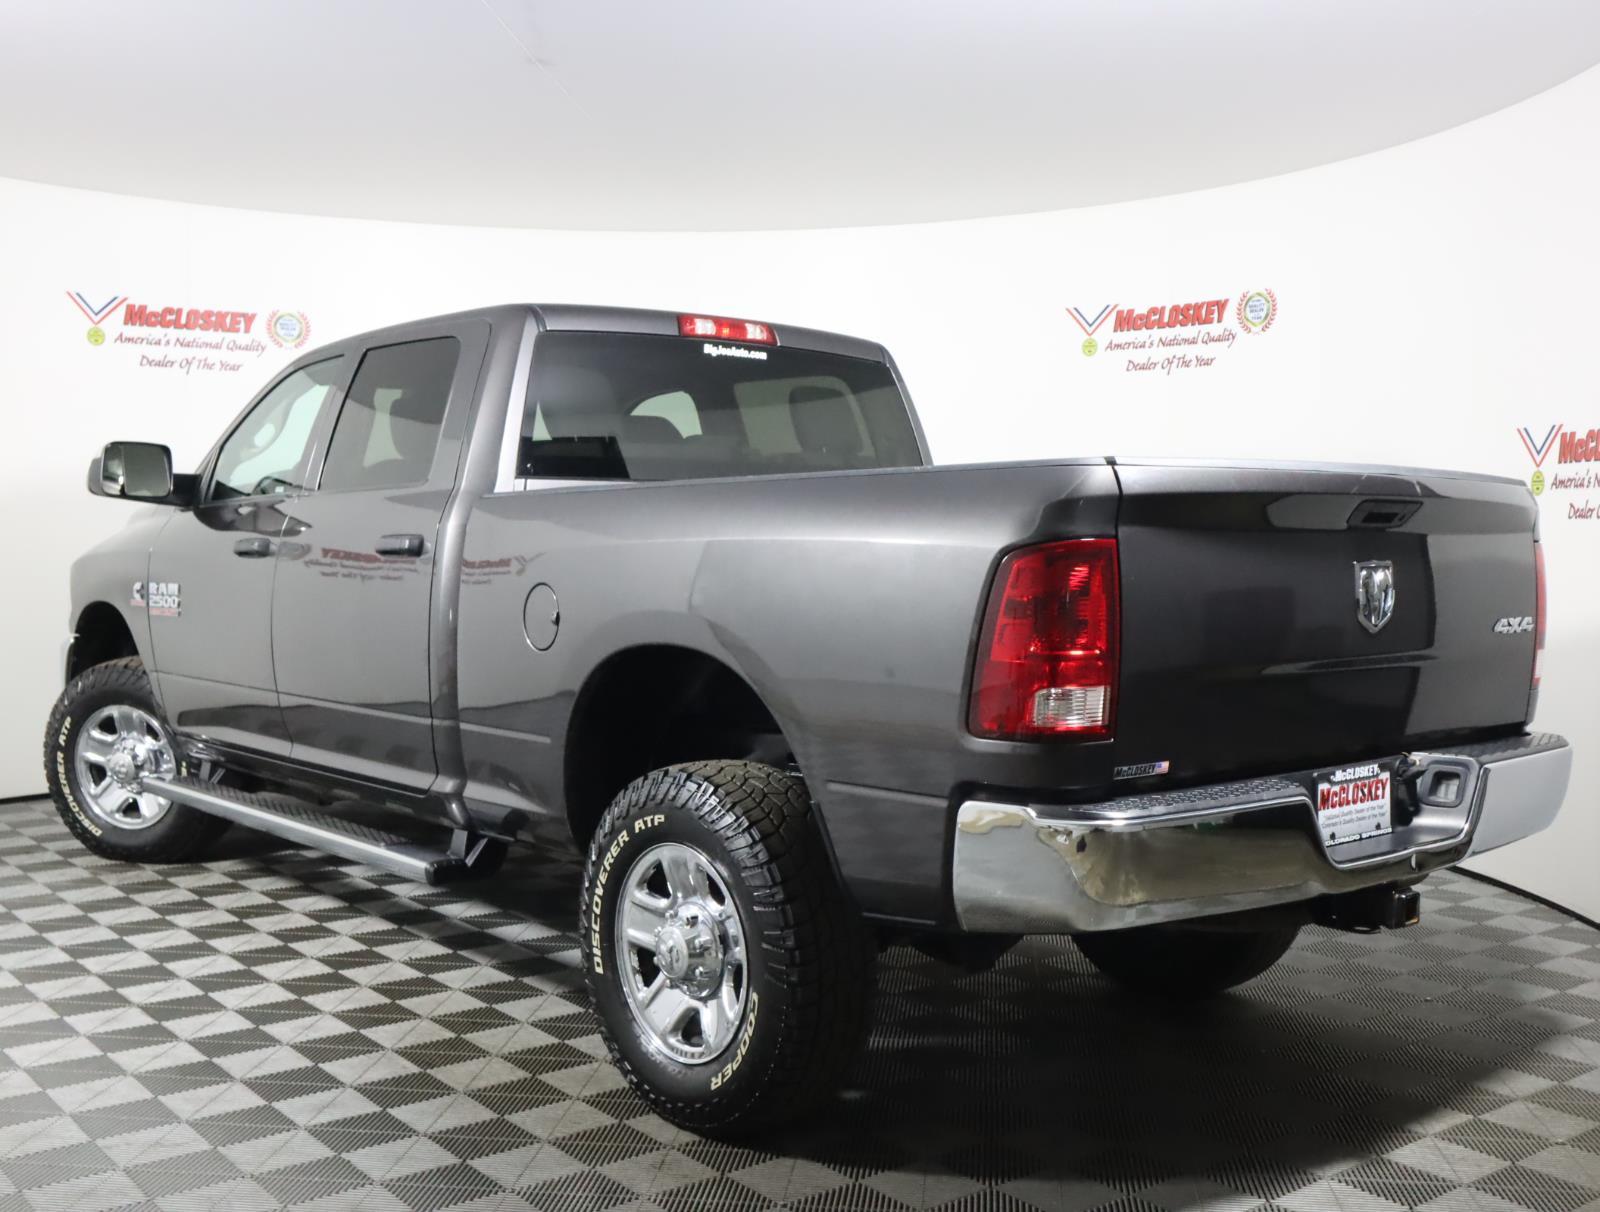 Preowned 2016 Ram 2500 Tradesman for sale by McCloskey Imports & 4X4's in Colorado Springs, CO